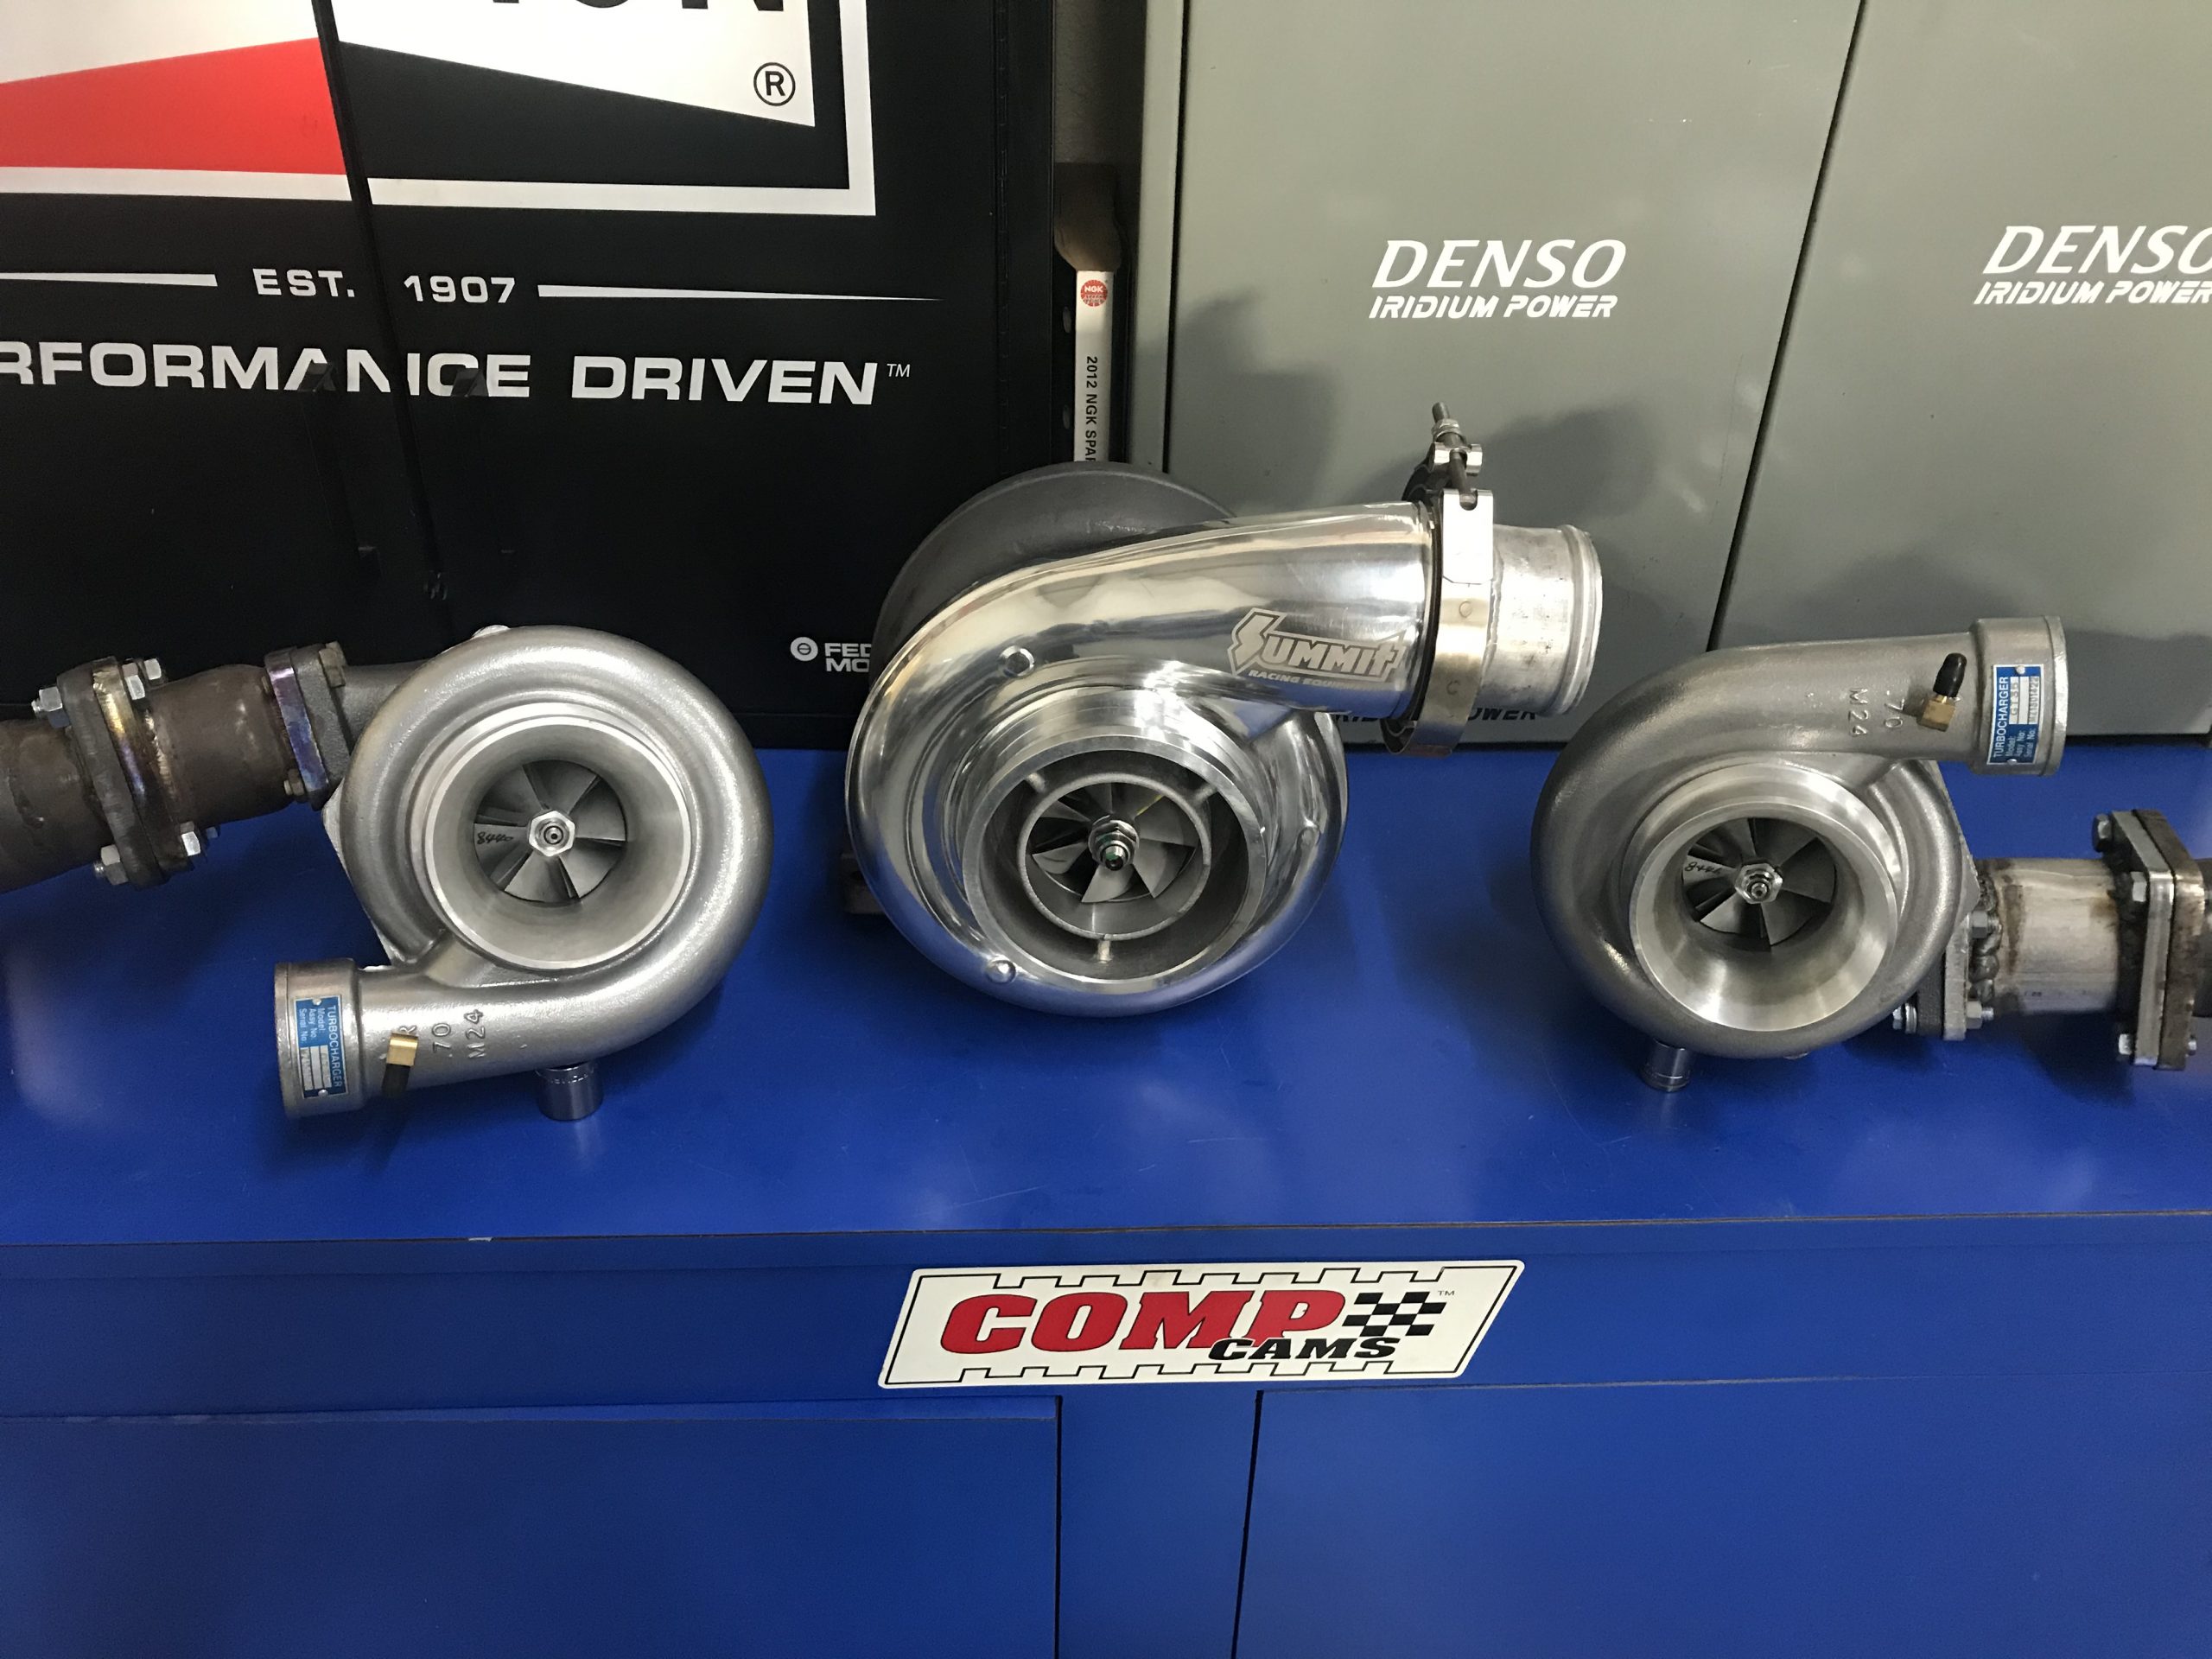 Single or Twin Turbos—Which One is Better for Boosting Your LS Engine?